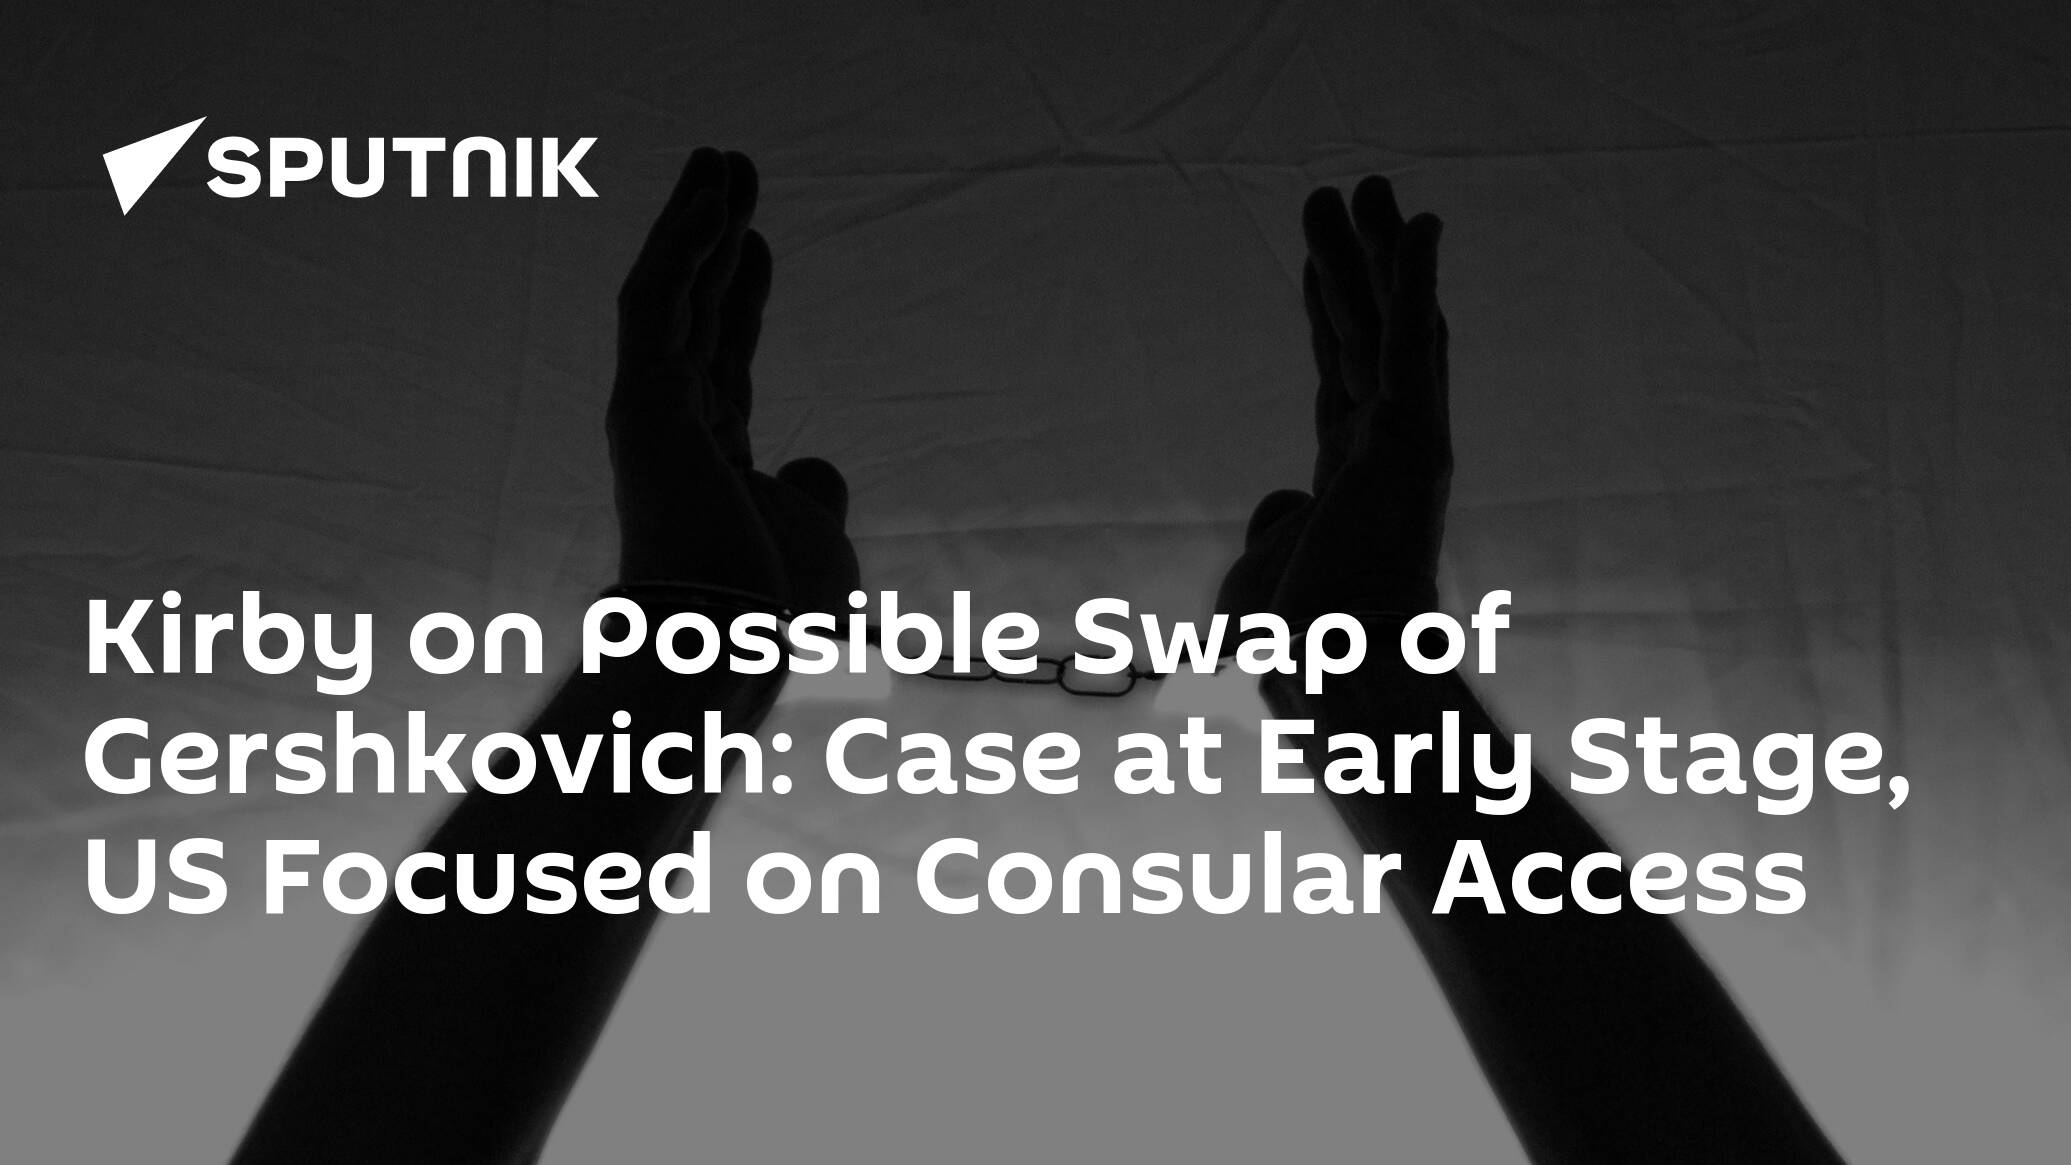 Kirby on Possible Swap of Gershkovich: Case at Early Stage, US Focused on Consular Access